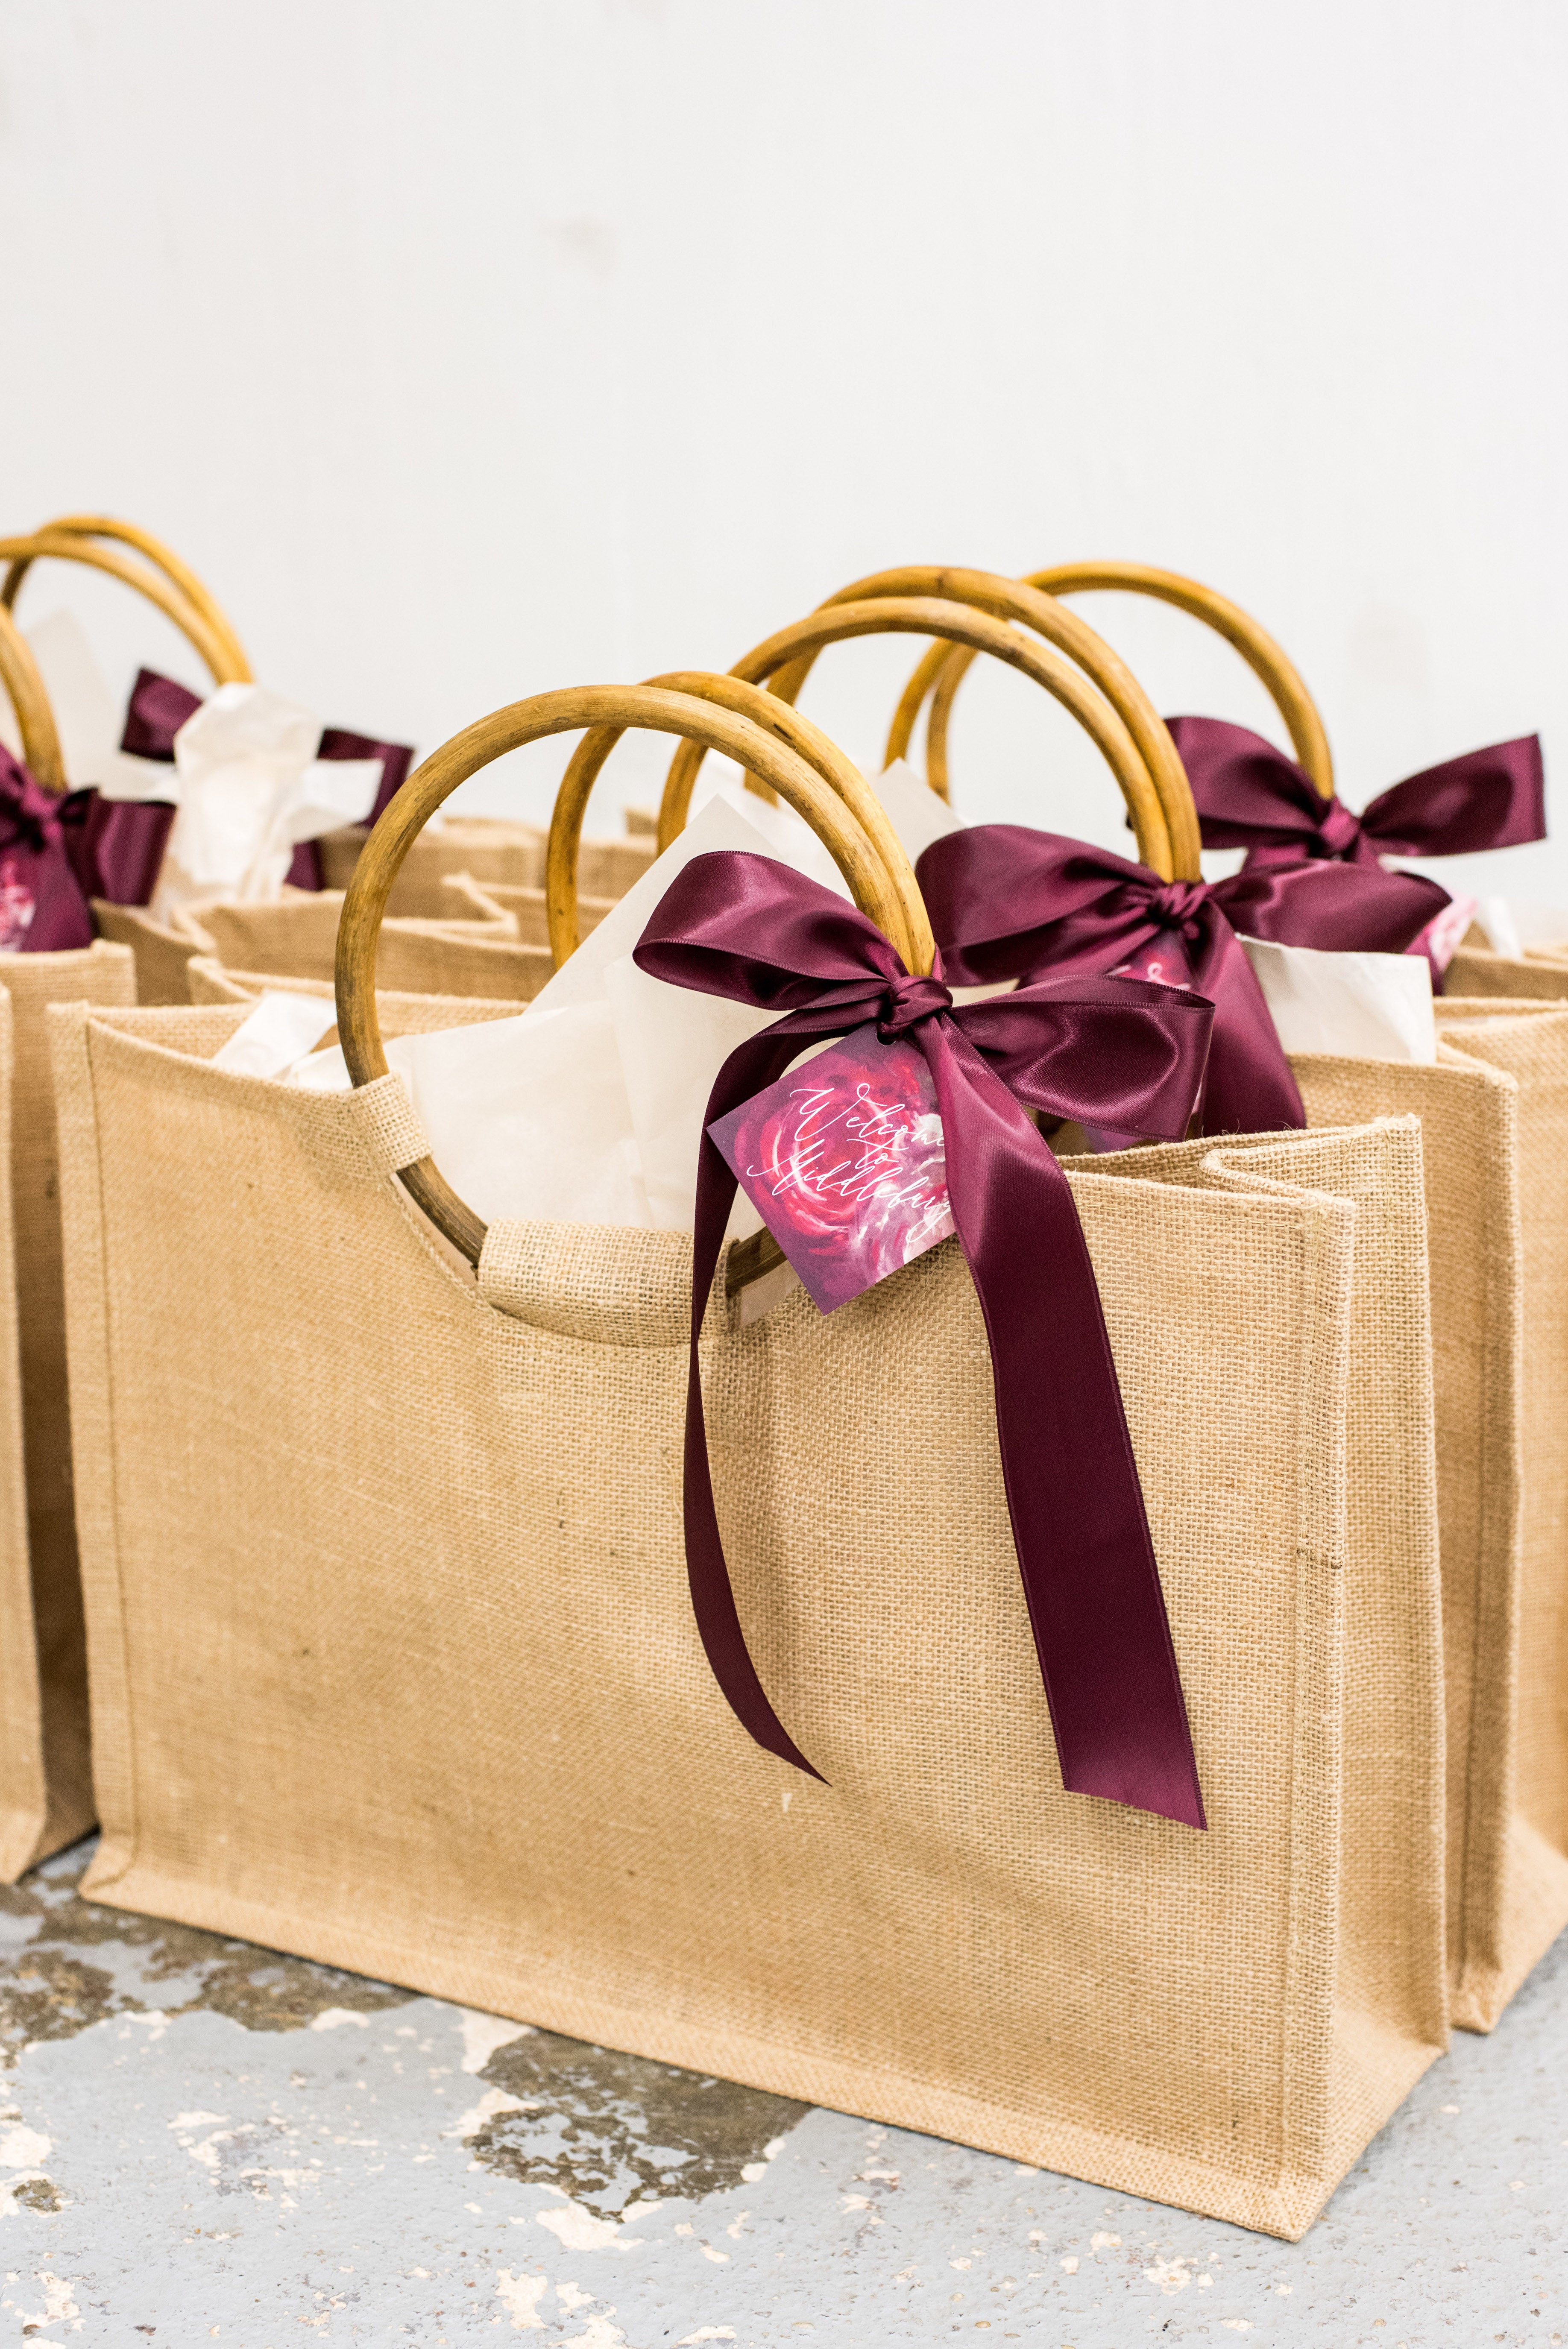 Skip wedding favors and give wedding welcome gifts